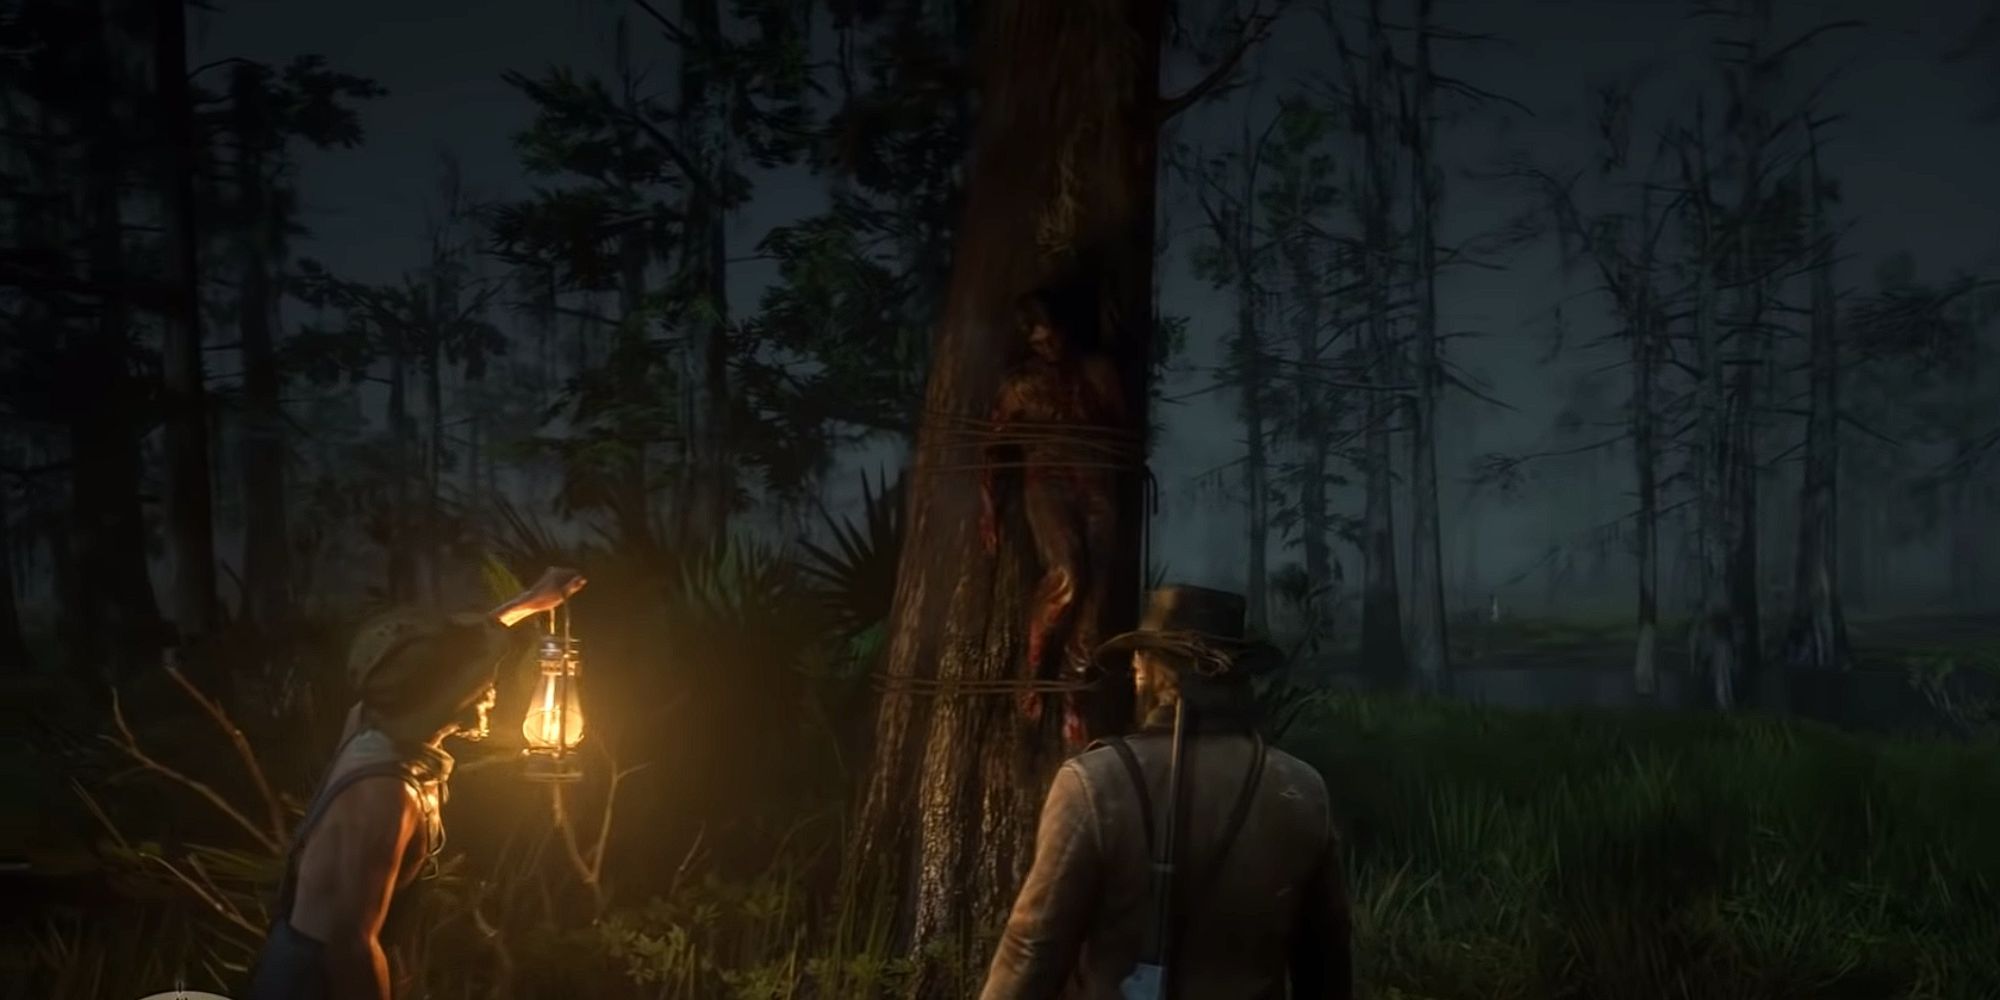 Arthur and the old man holding a lantern look up at a dead body tied to a tree at night